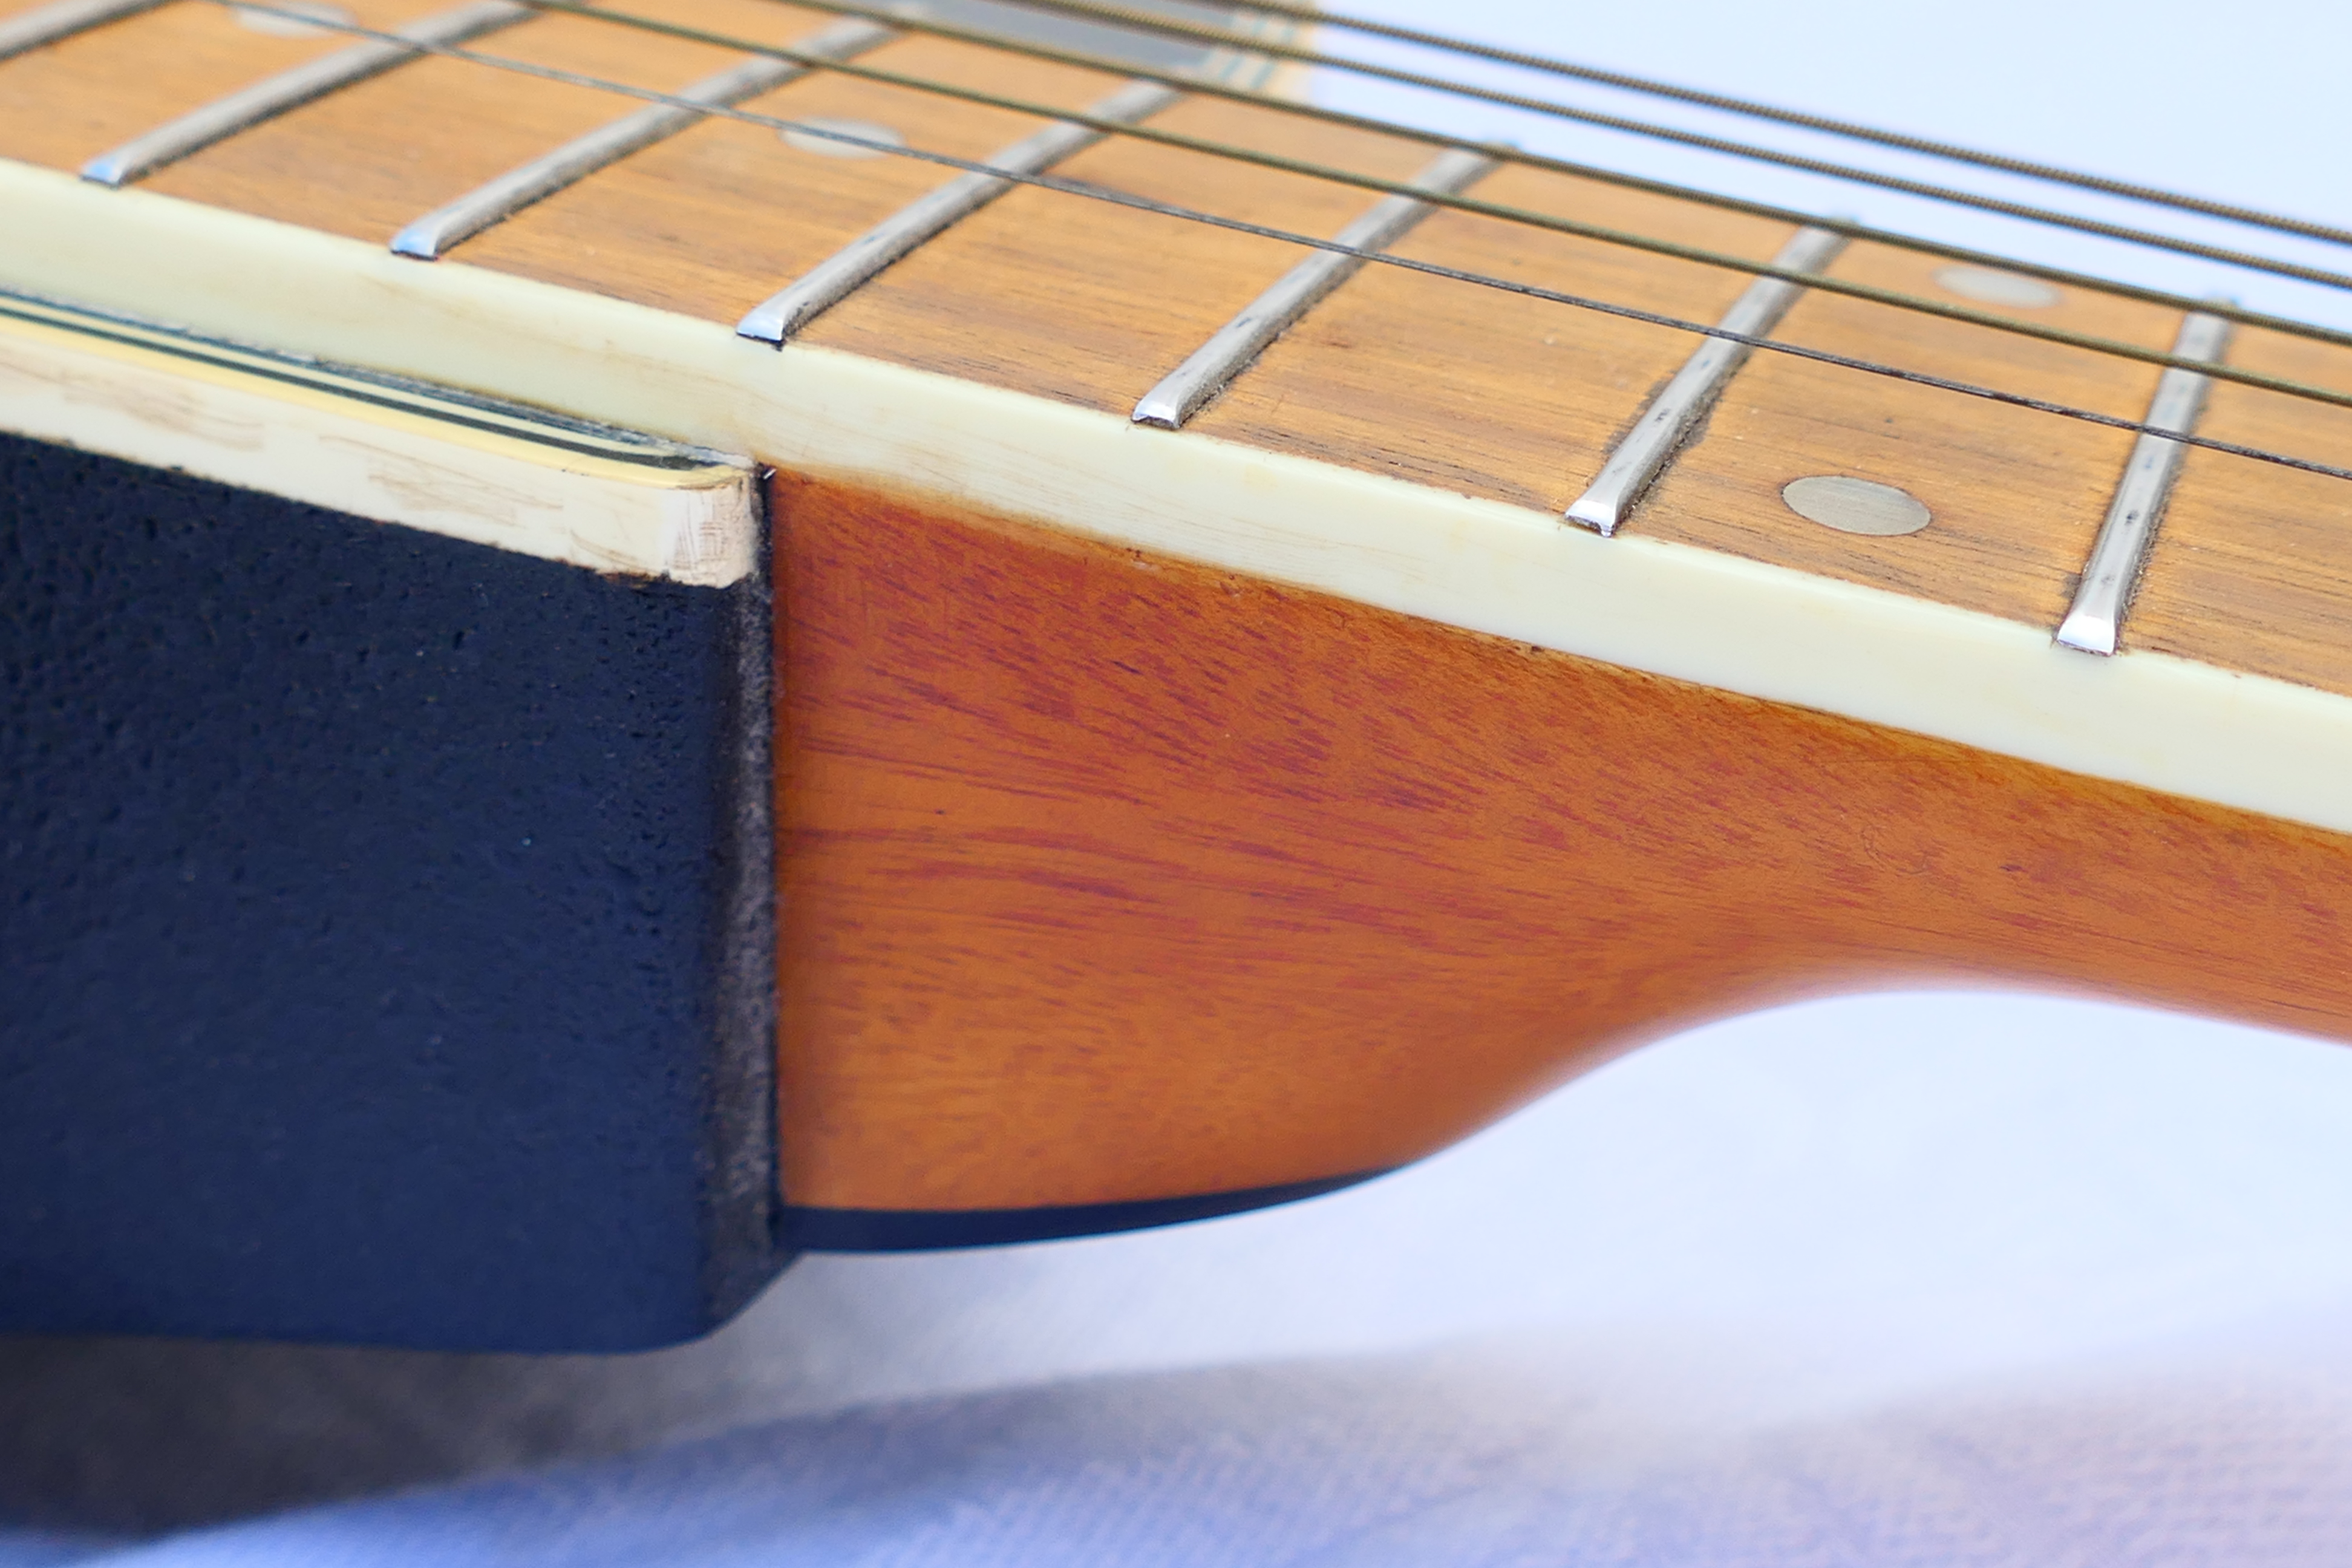 Ashland by Crafter - An electro acoustic guitar, model AFC - 150 / RS. - Image 7 of 11